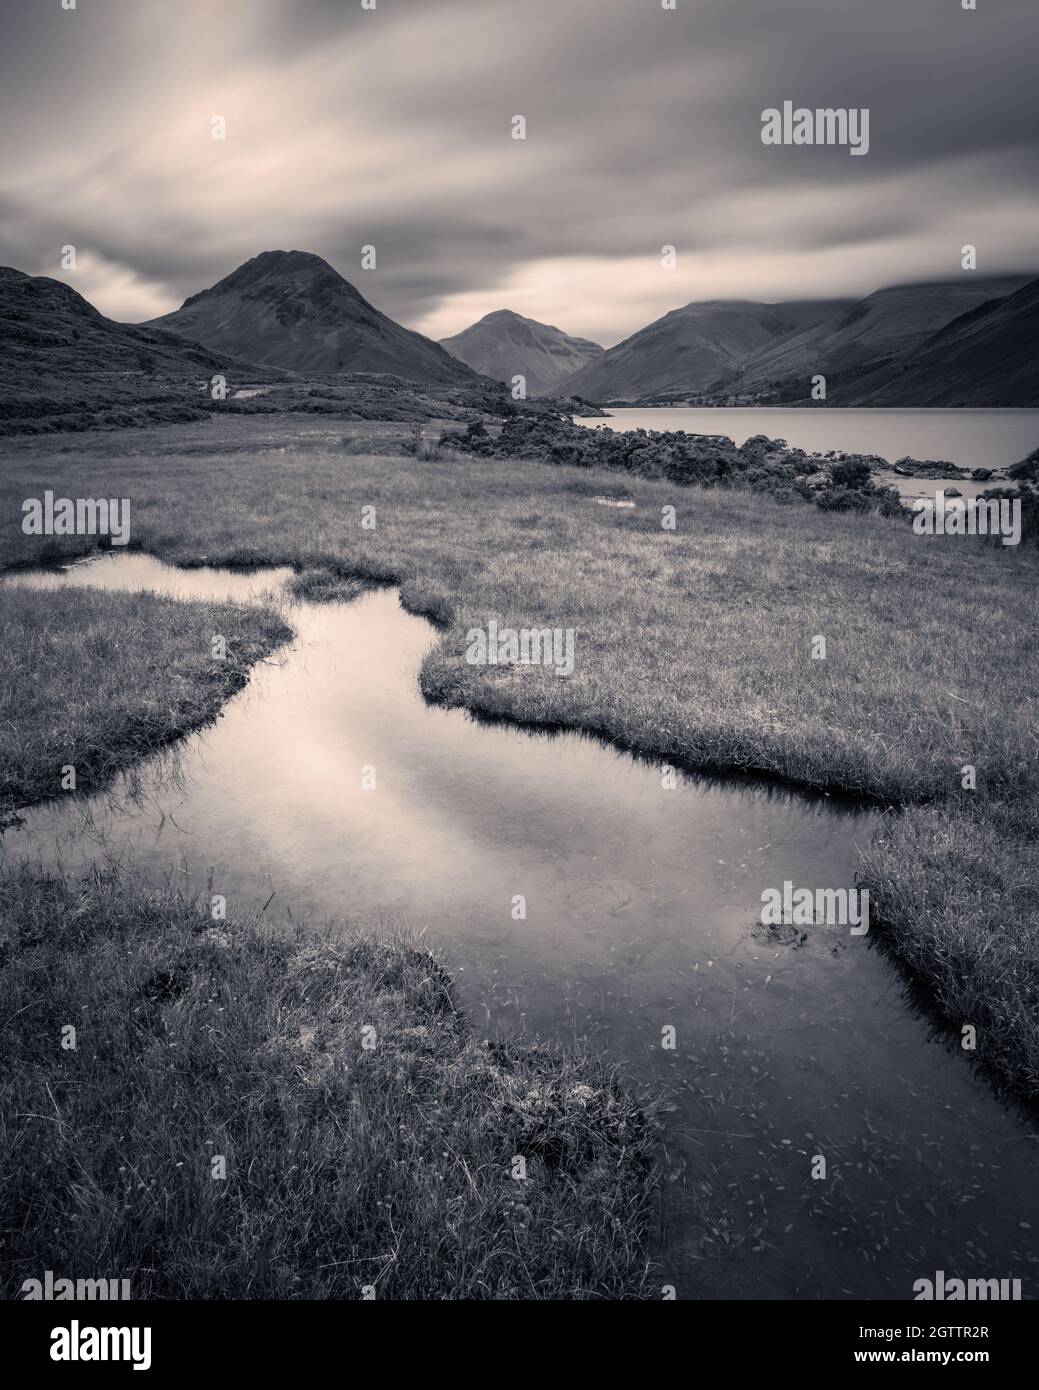 A long exposure captures the motion in the clouds scudding over the high fells at the head of Wasdale on a moody September evening. Stock Photo